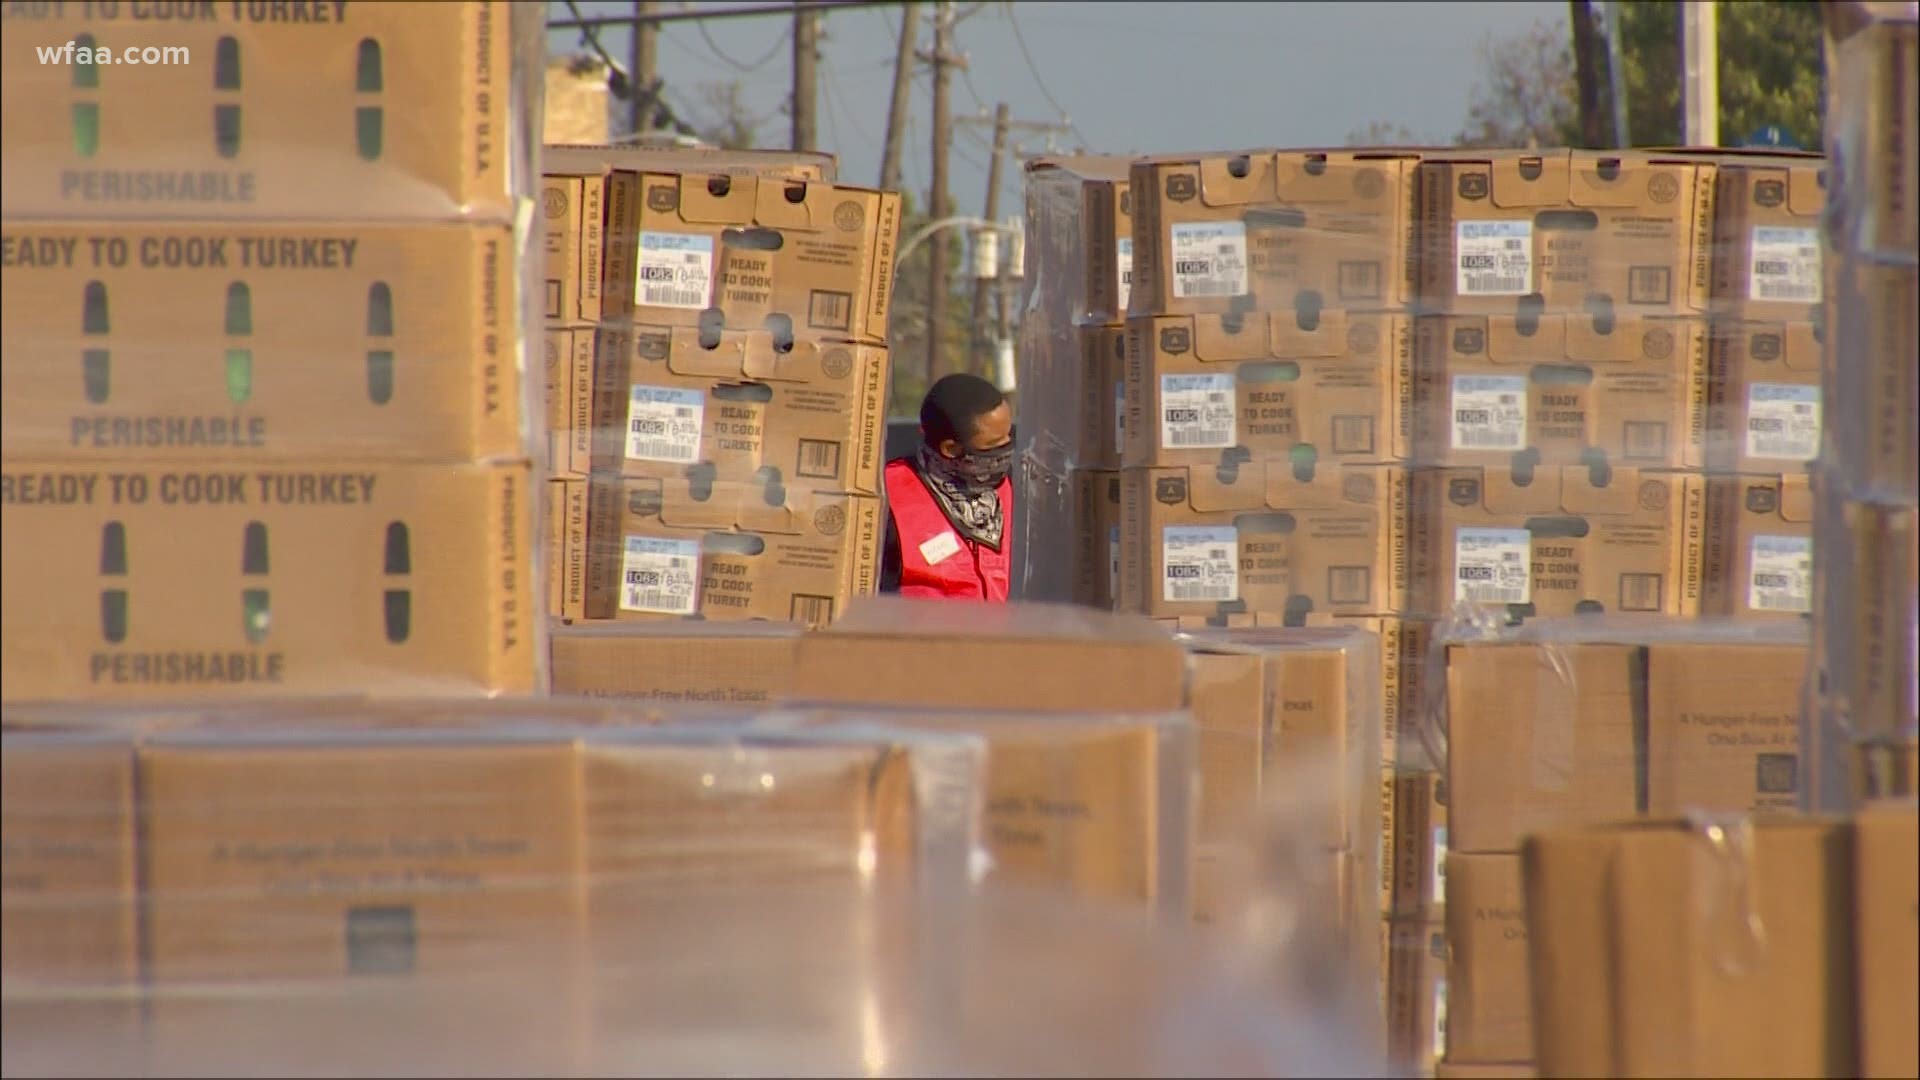 Tuesday is the last distribution day for many food pantries.